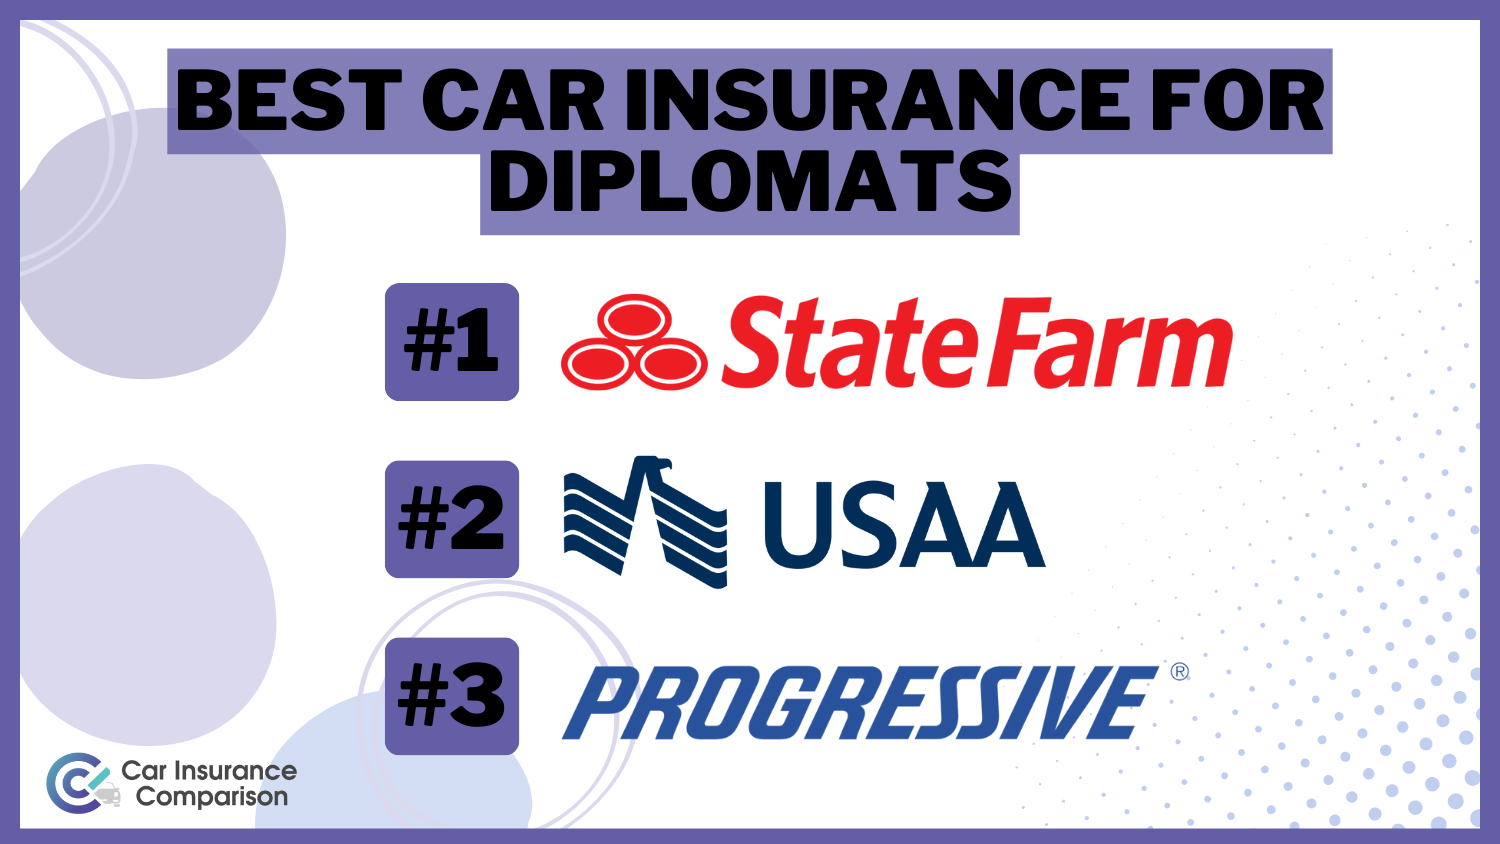 Best Car Insurance for Diplomats: State Farm, USAA, and Progressive